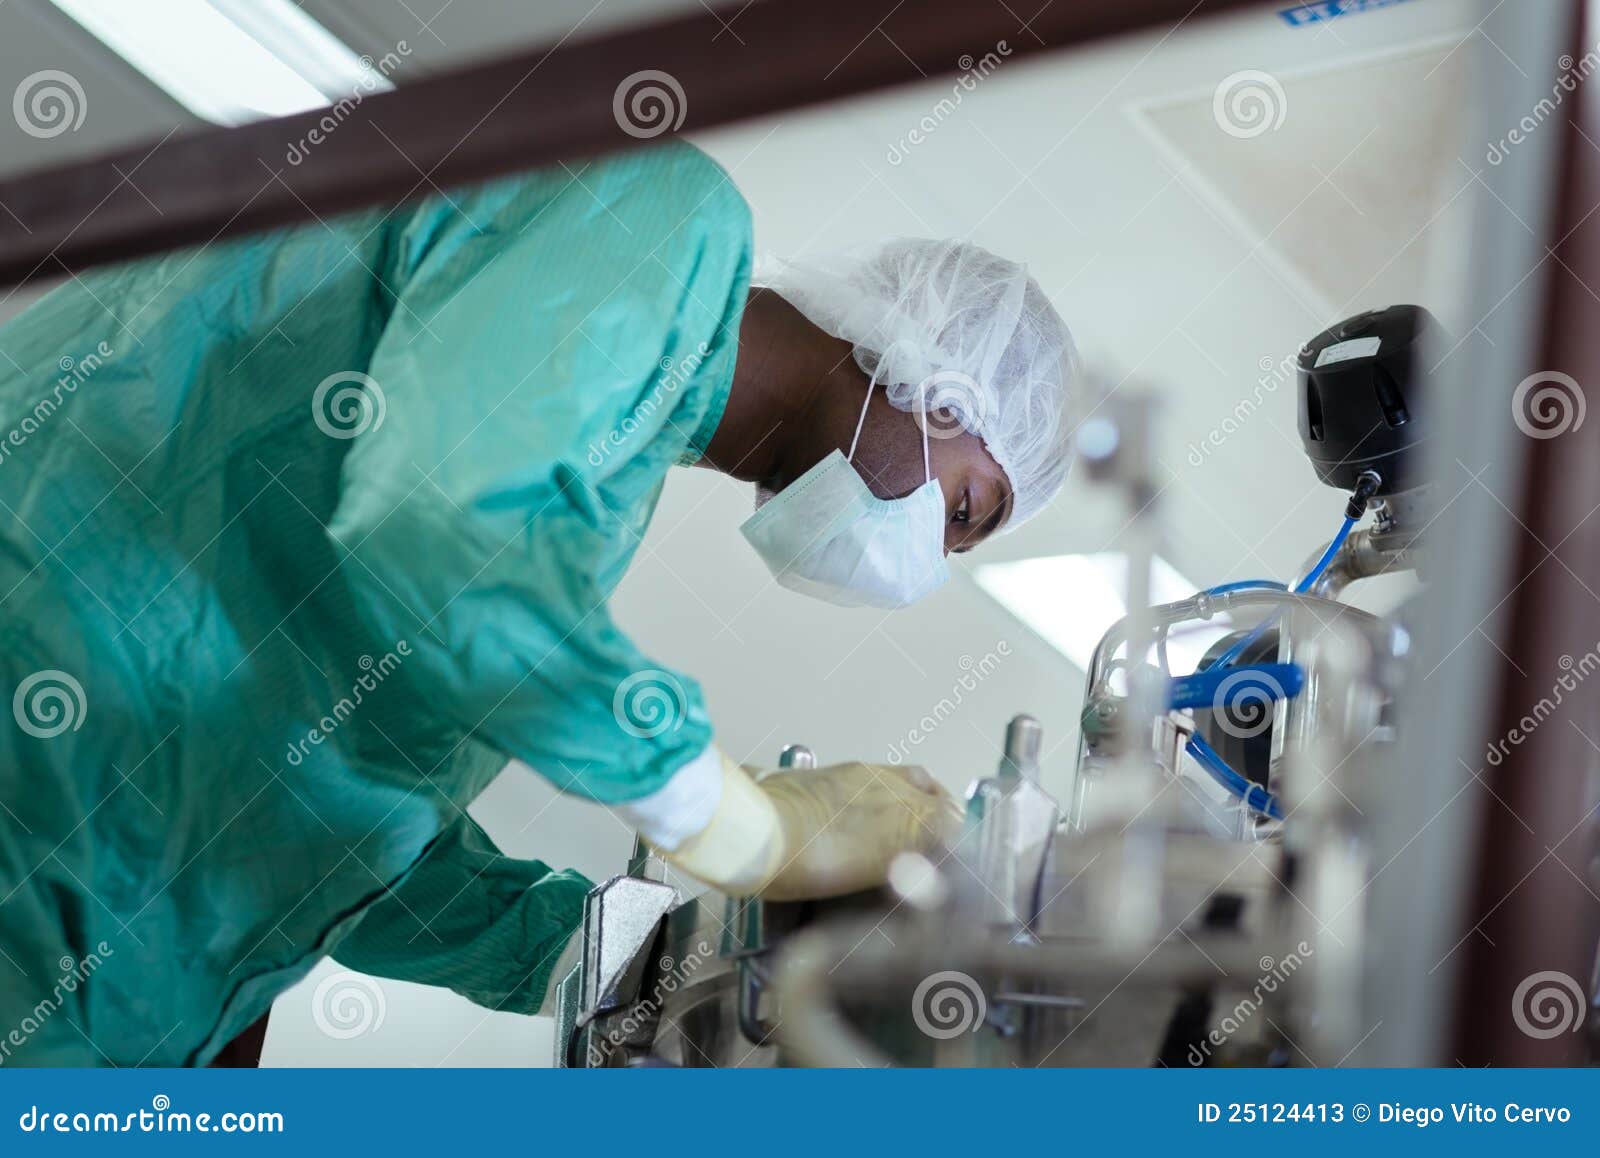 man working in pharmaceutical laboratory